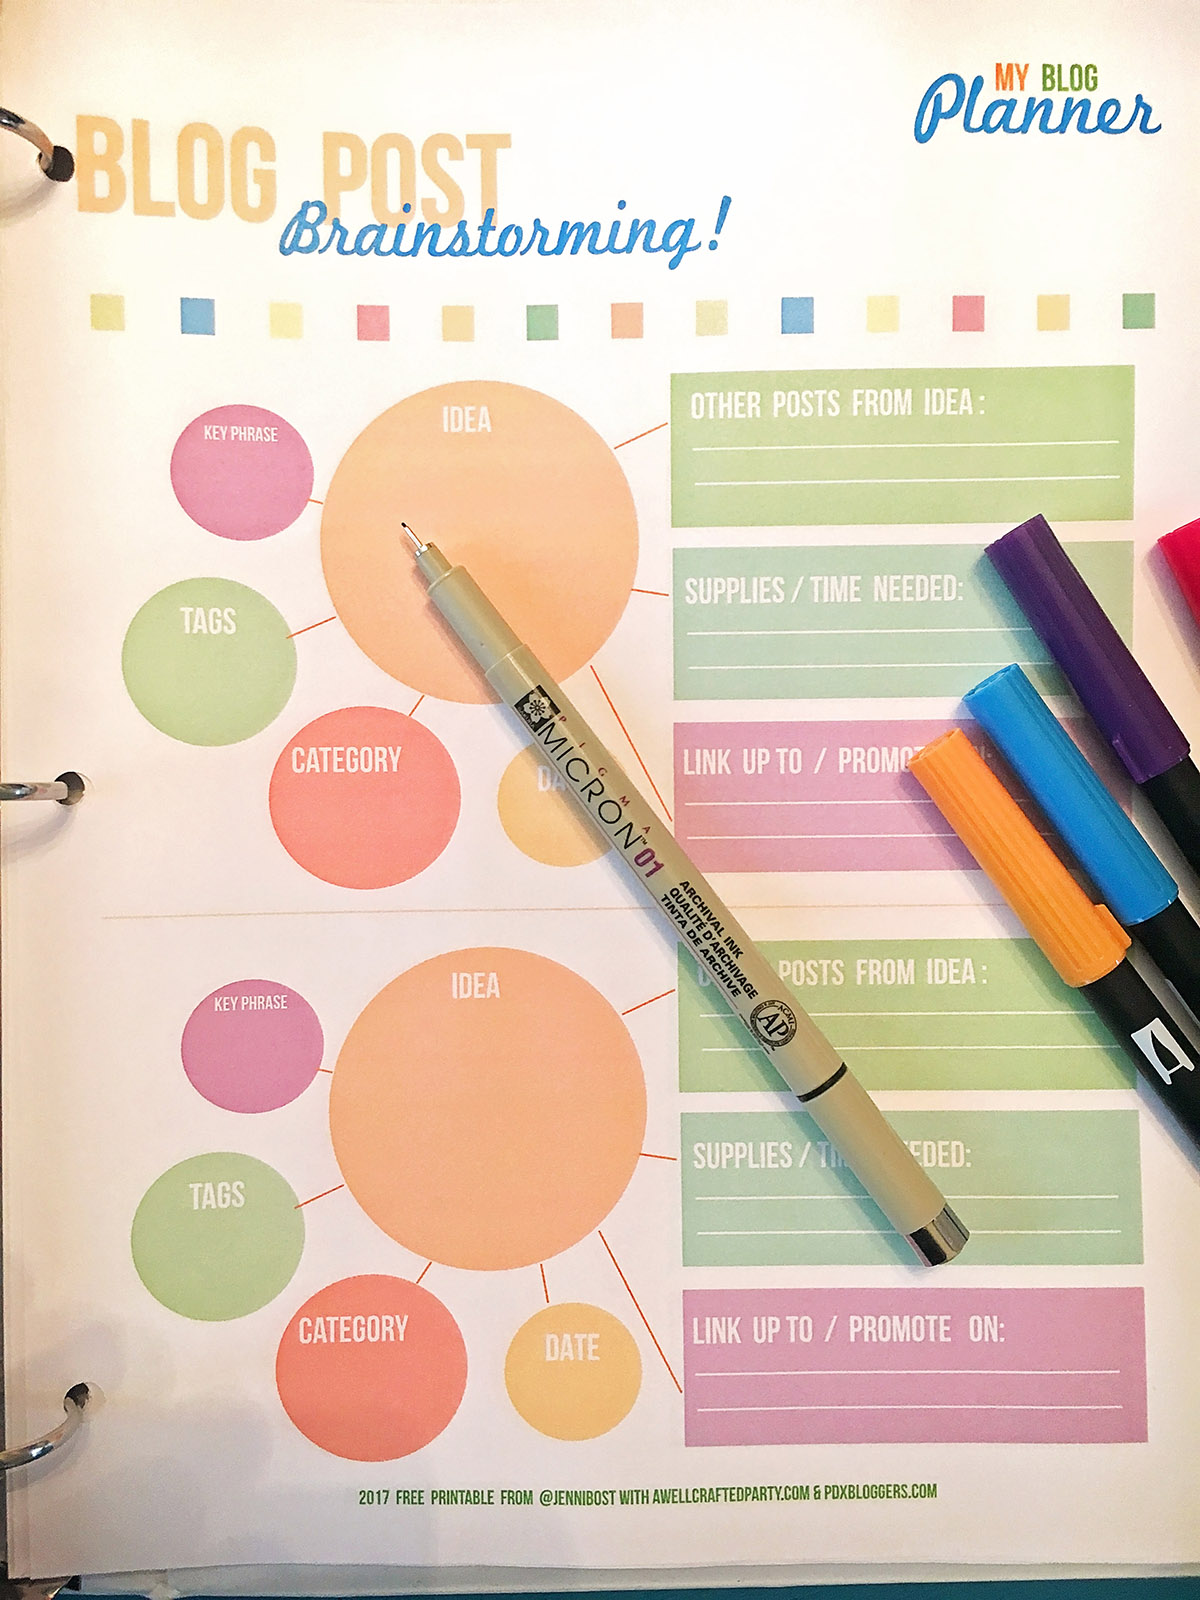 Blog Brainstorming Worksheets Free Printables - A Well Crafted Party